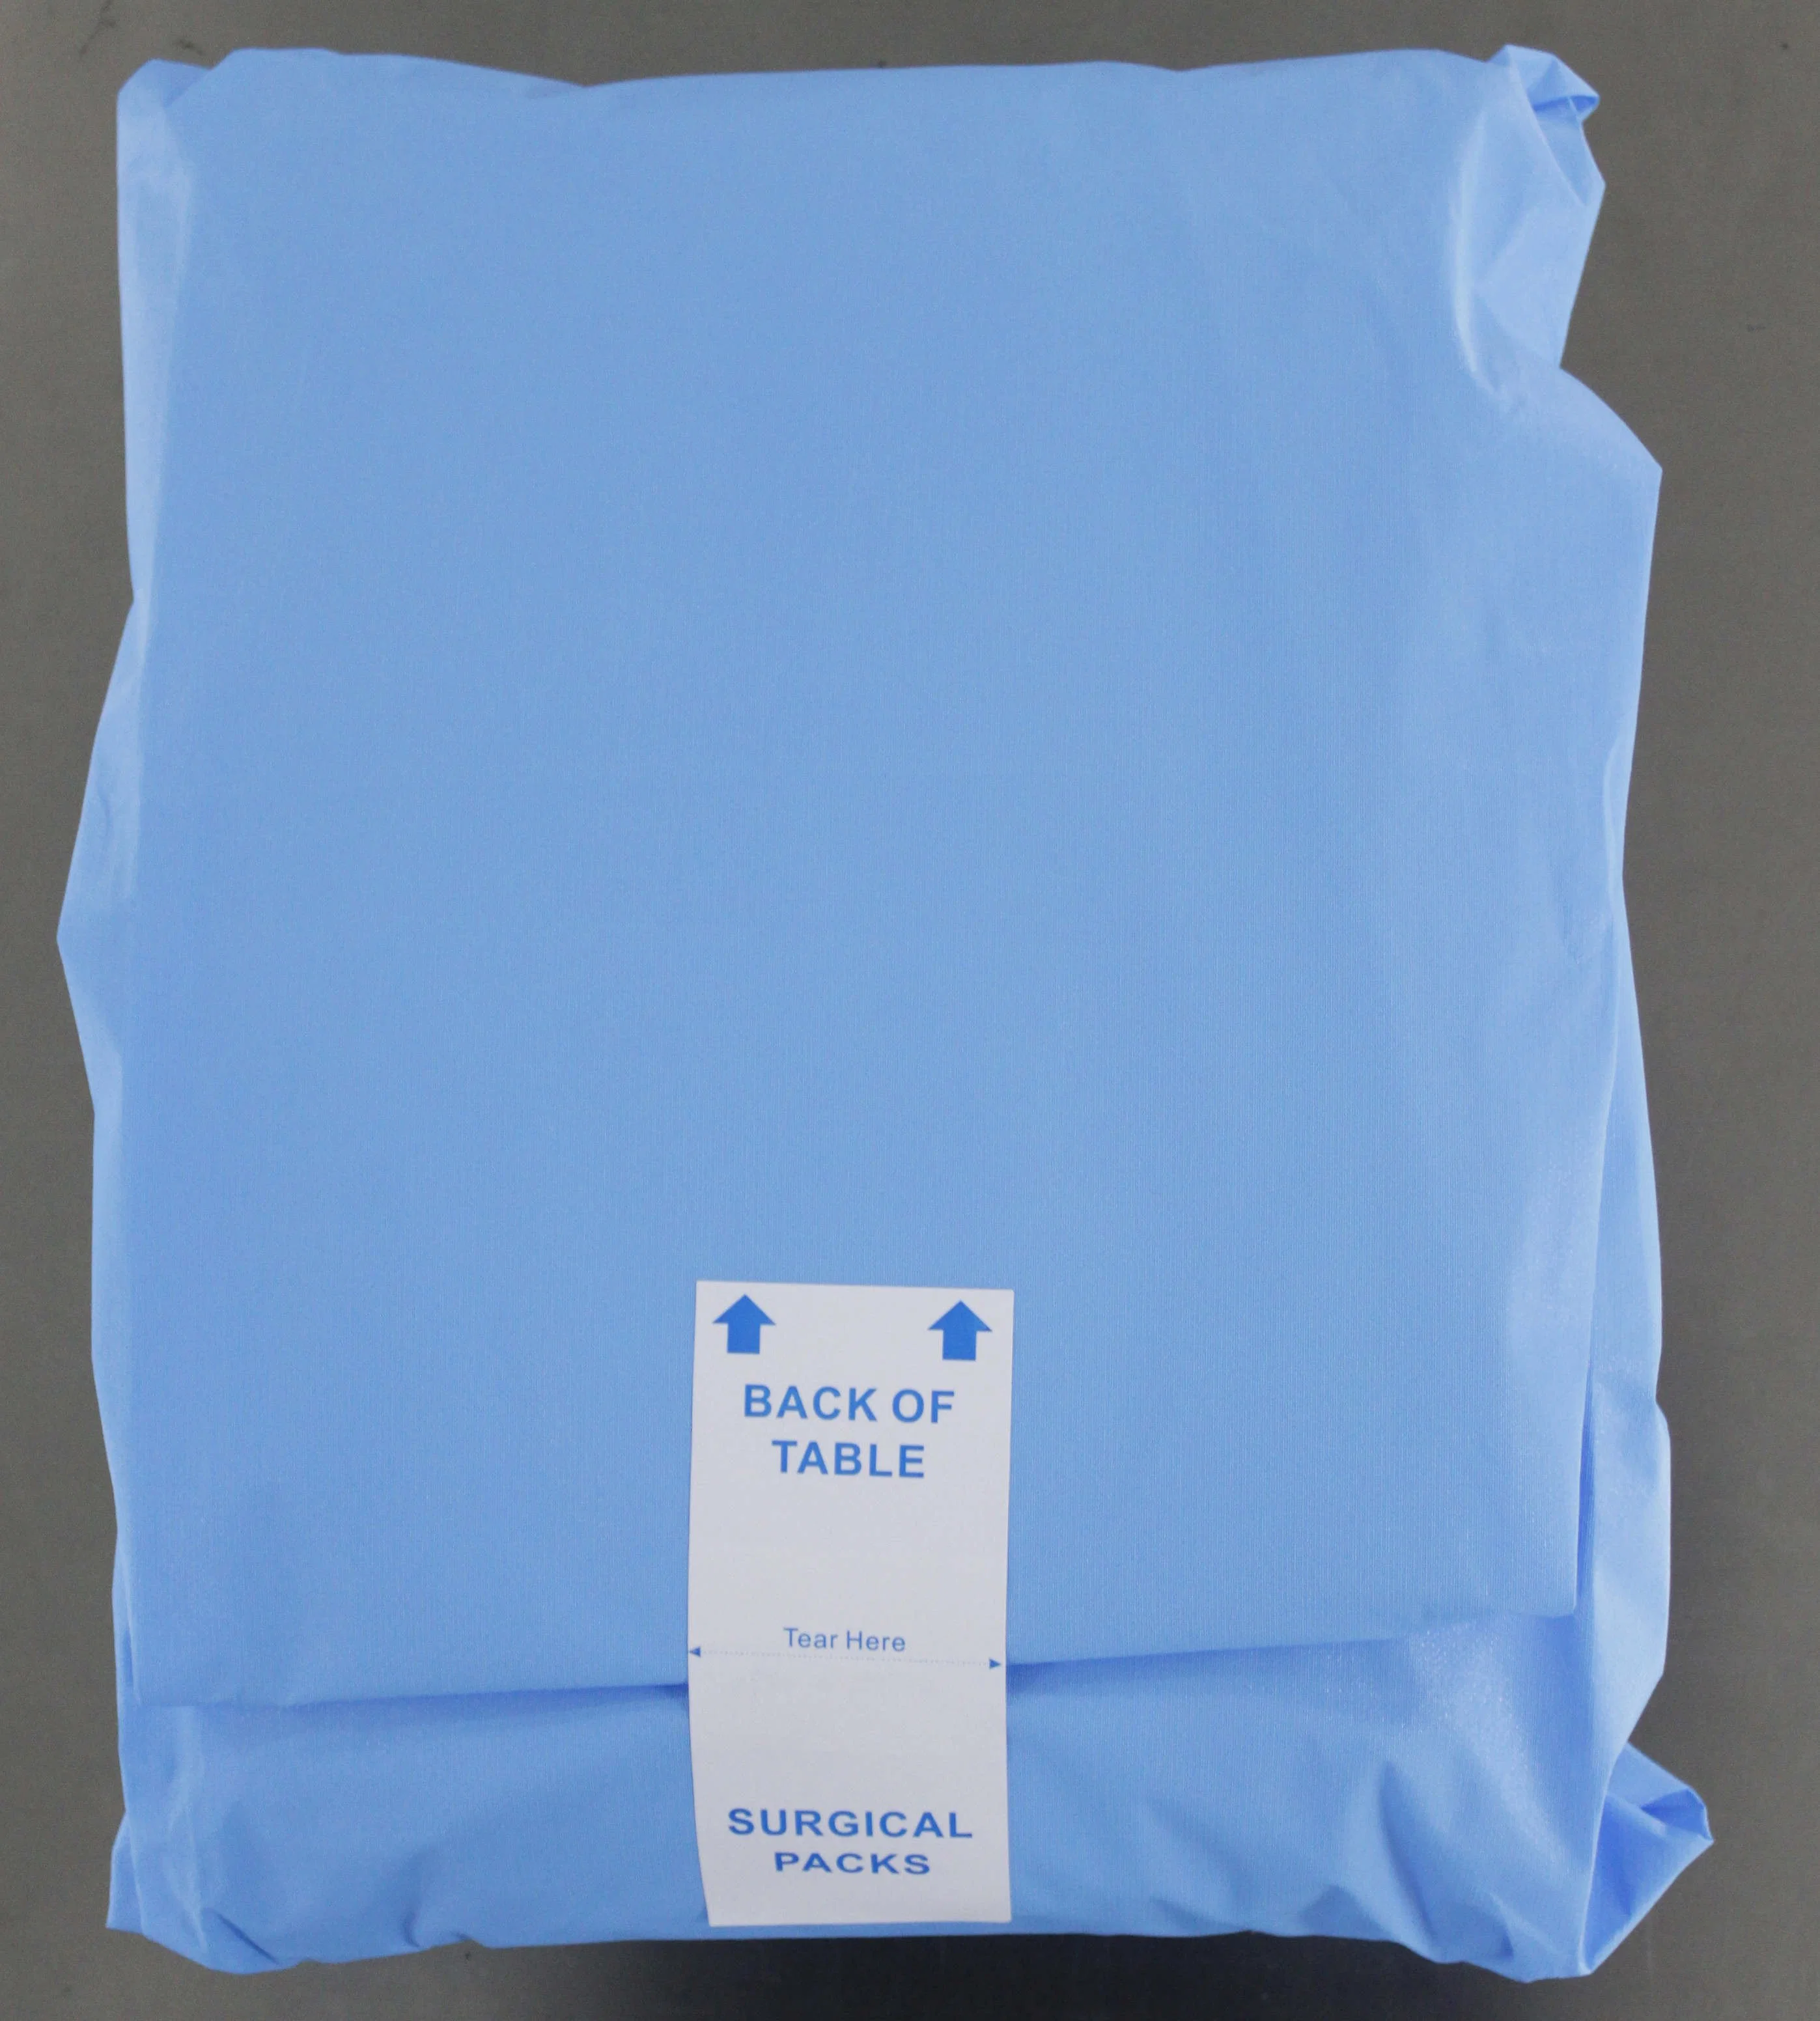 Hospital Use Sterile General Surgical Universal Drape Pack